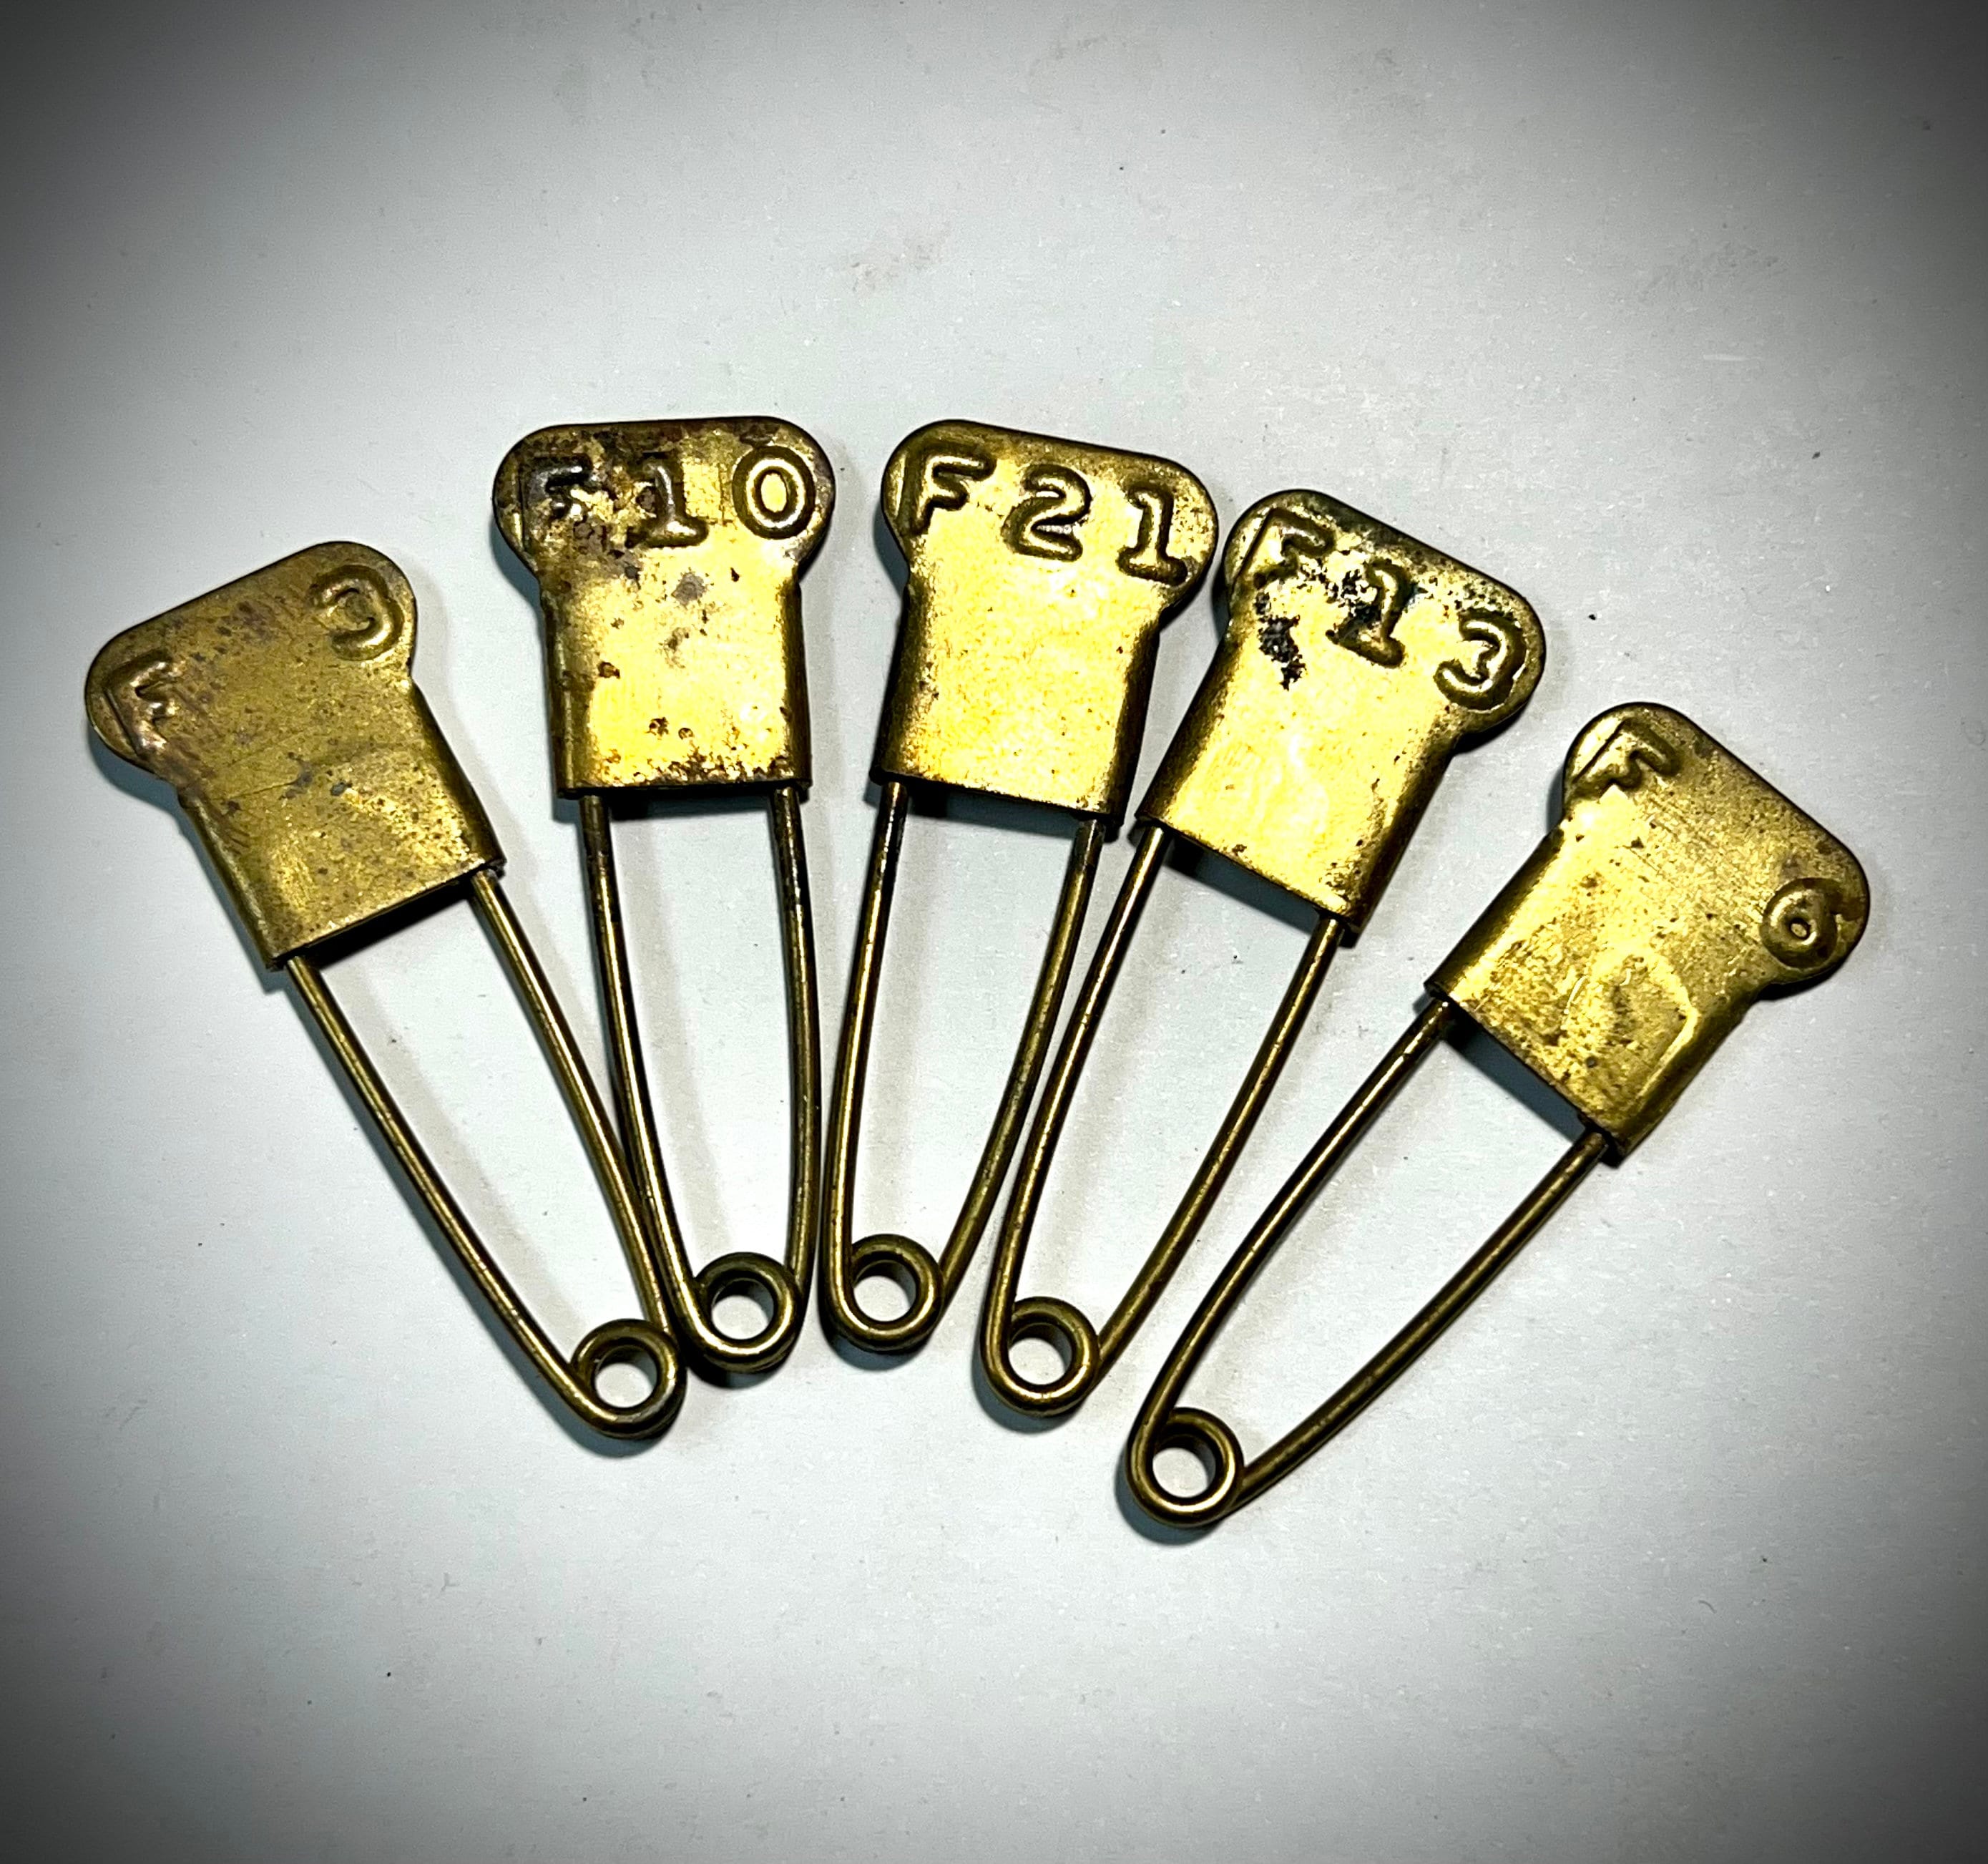 Big Size Metal Safety Pins Extra Large Gold Heavy Duty Safe Pins